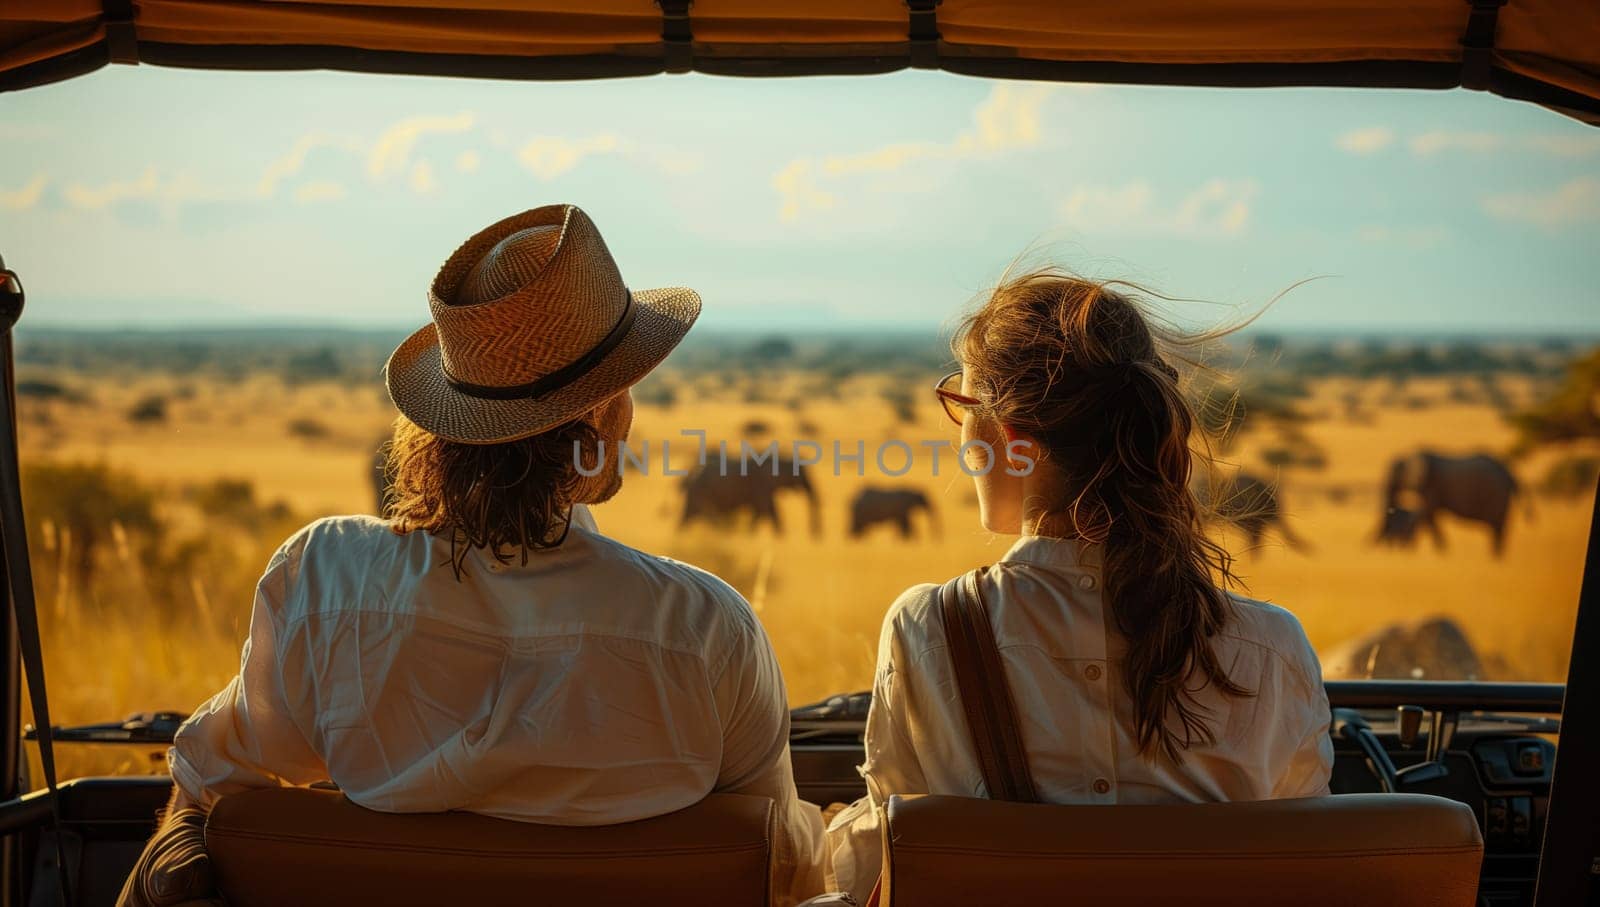 Women and a man are sitting in the back of a jeep looking at elephants by richwolf